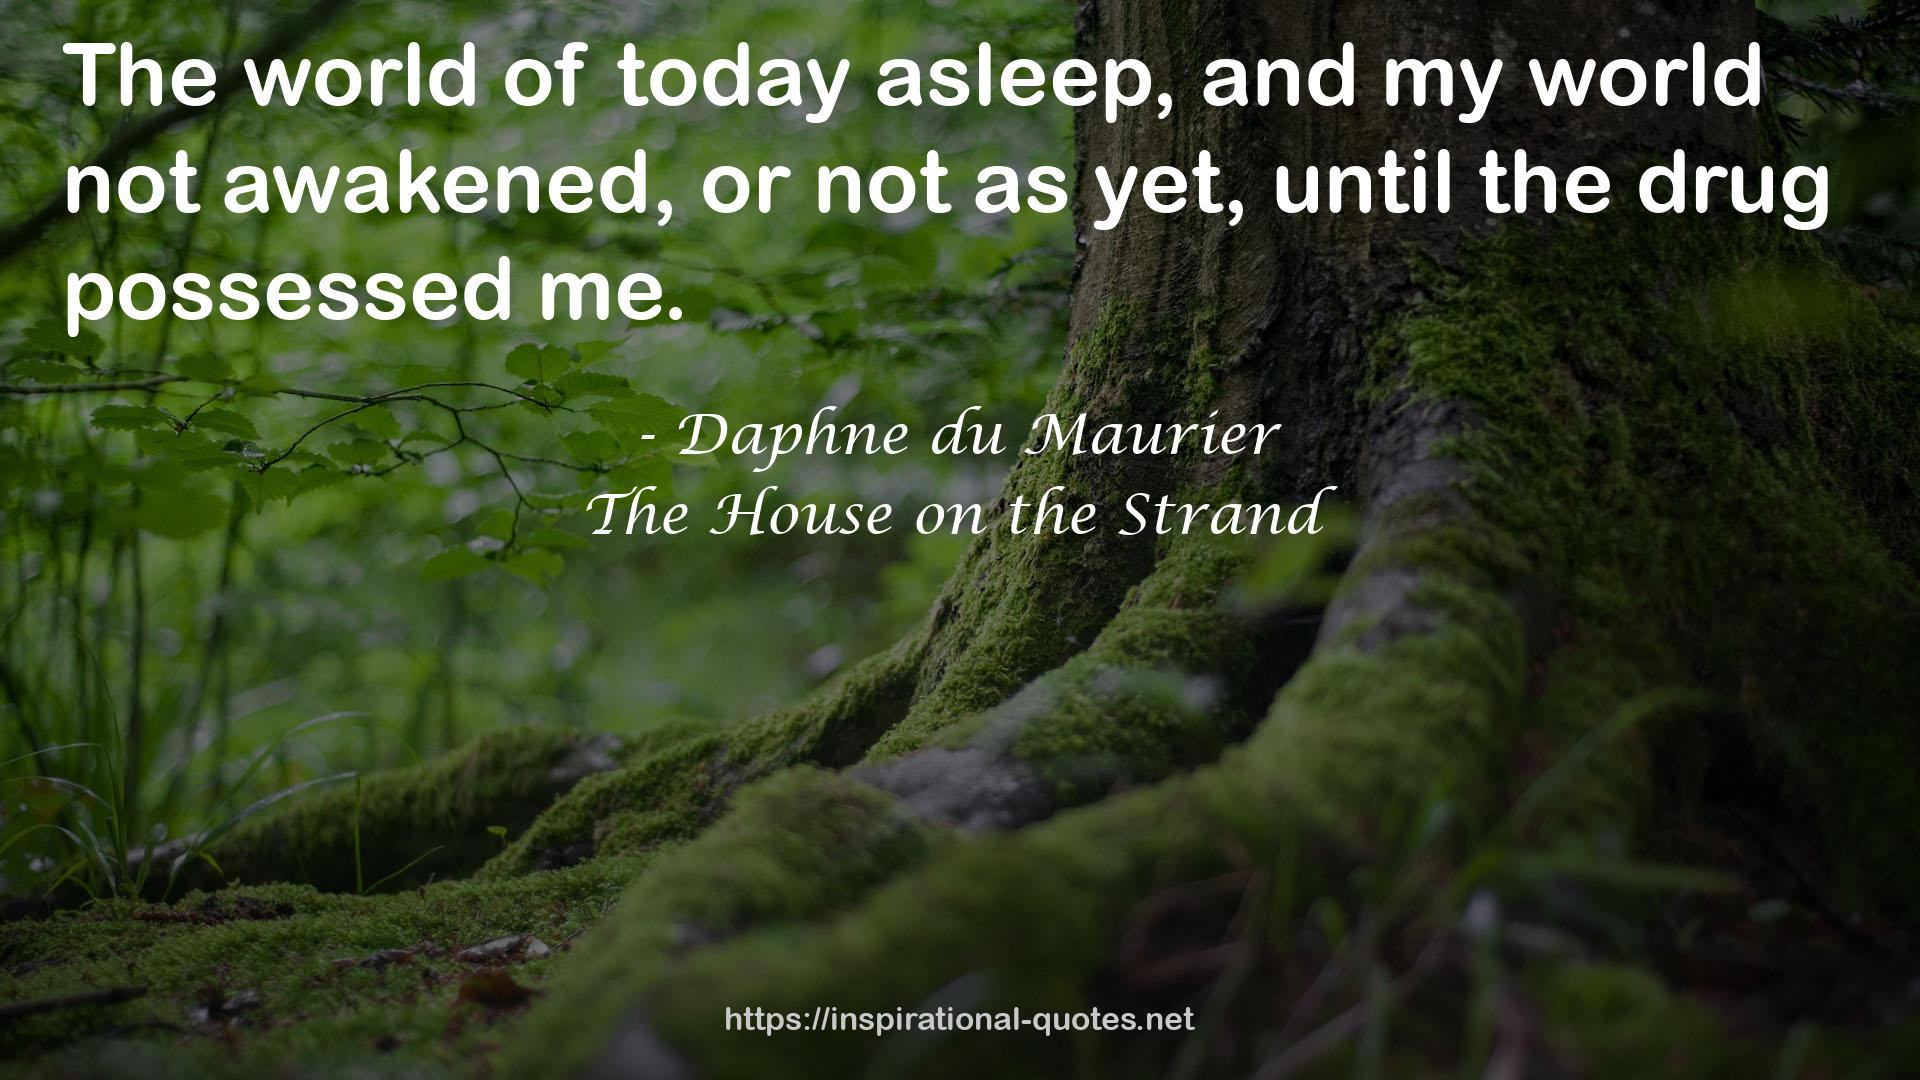 The House on the Strand QUOTES